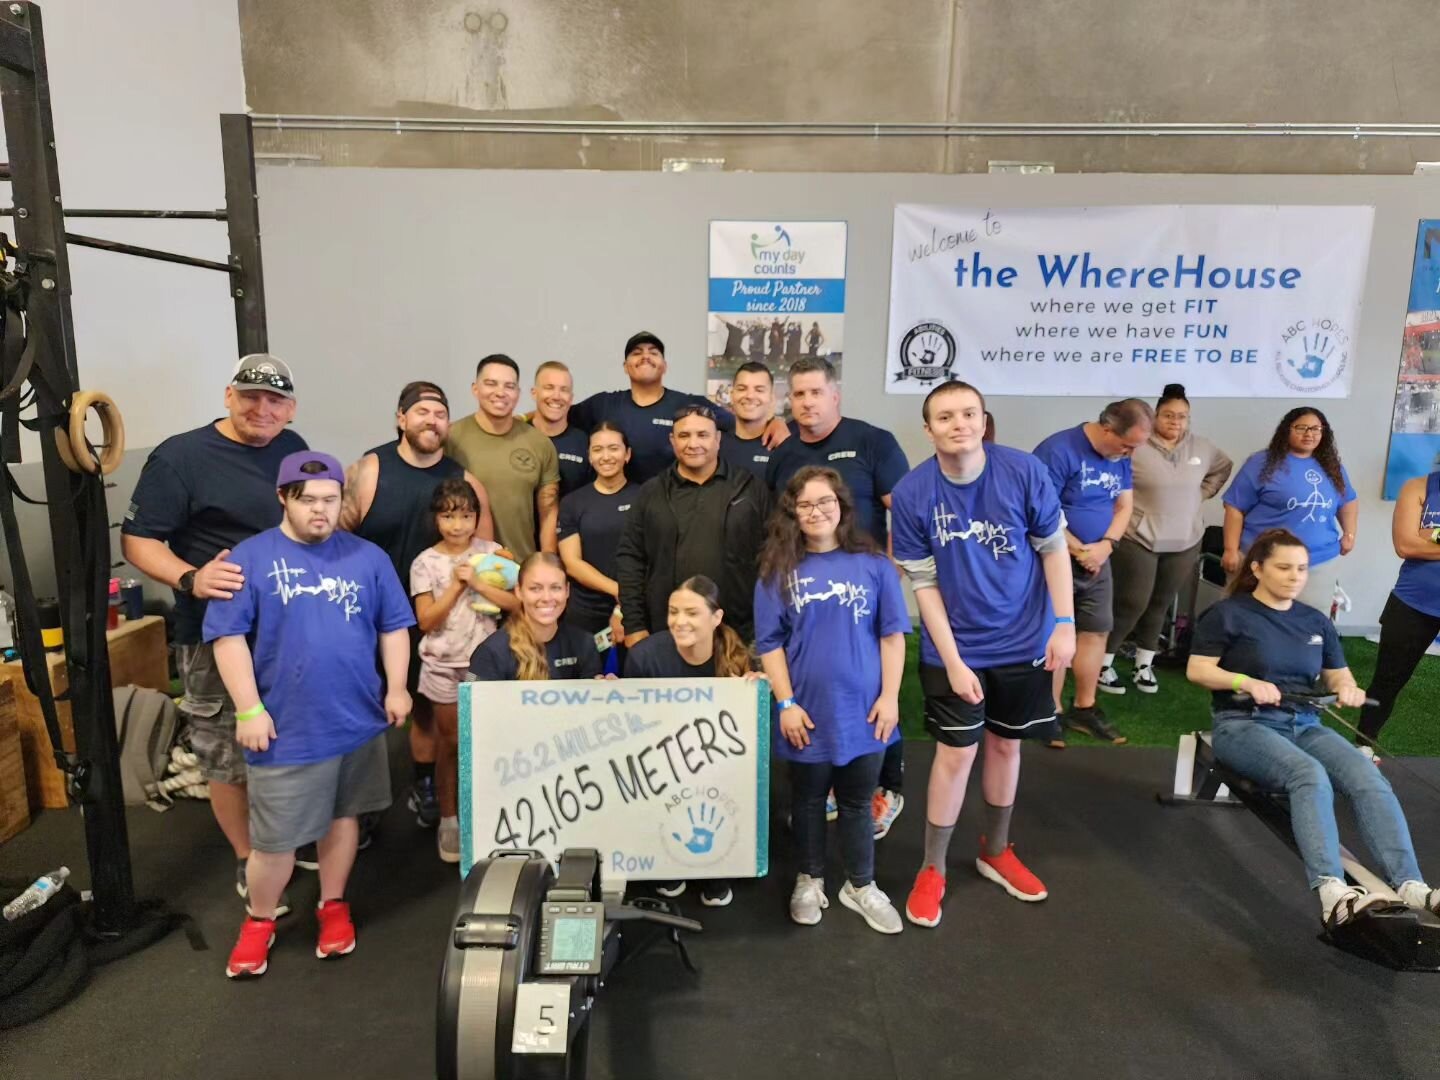 Thank you to all our sponsors, teams, and supporters who came out to row with us this morning. This is exactly what @abc_hopes is about, life skills, fitness, and COMMUNITY. 

#ABCHopes #rowathon #rowforhope #community #saturdayvibes